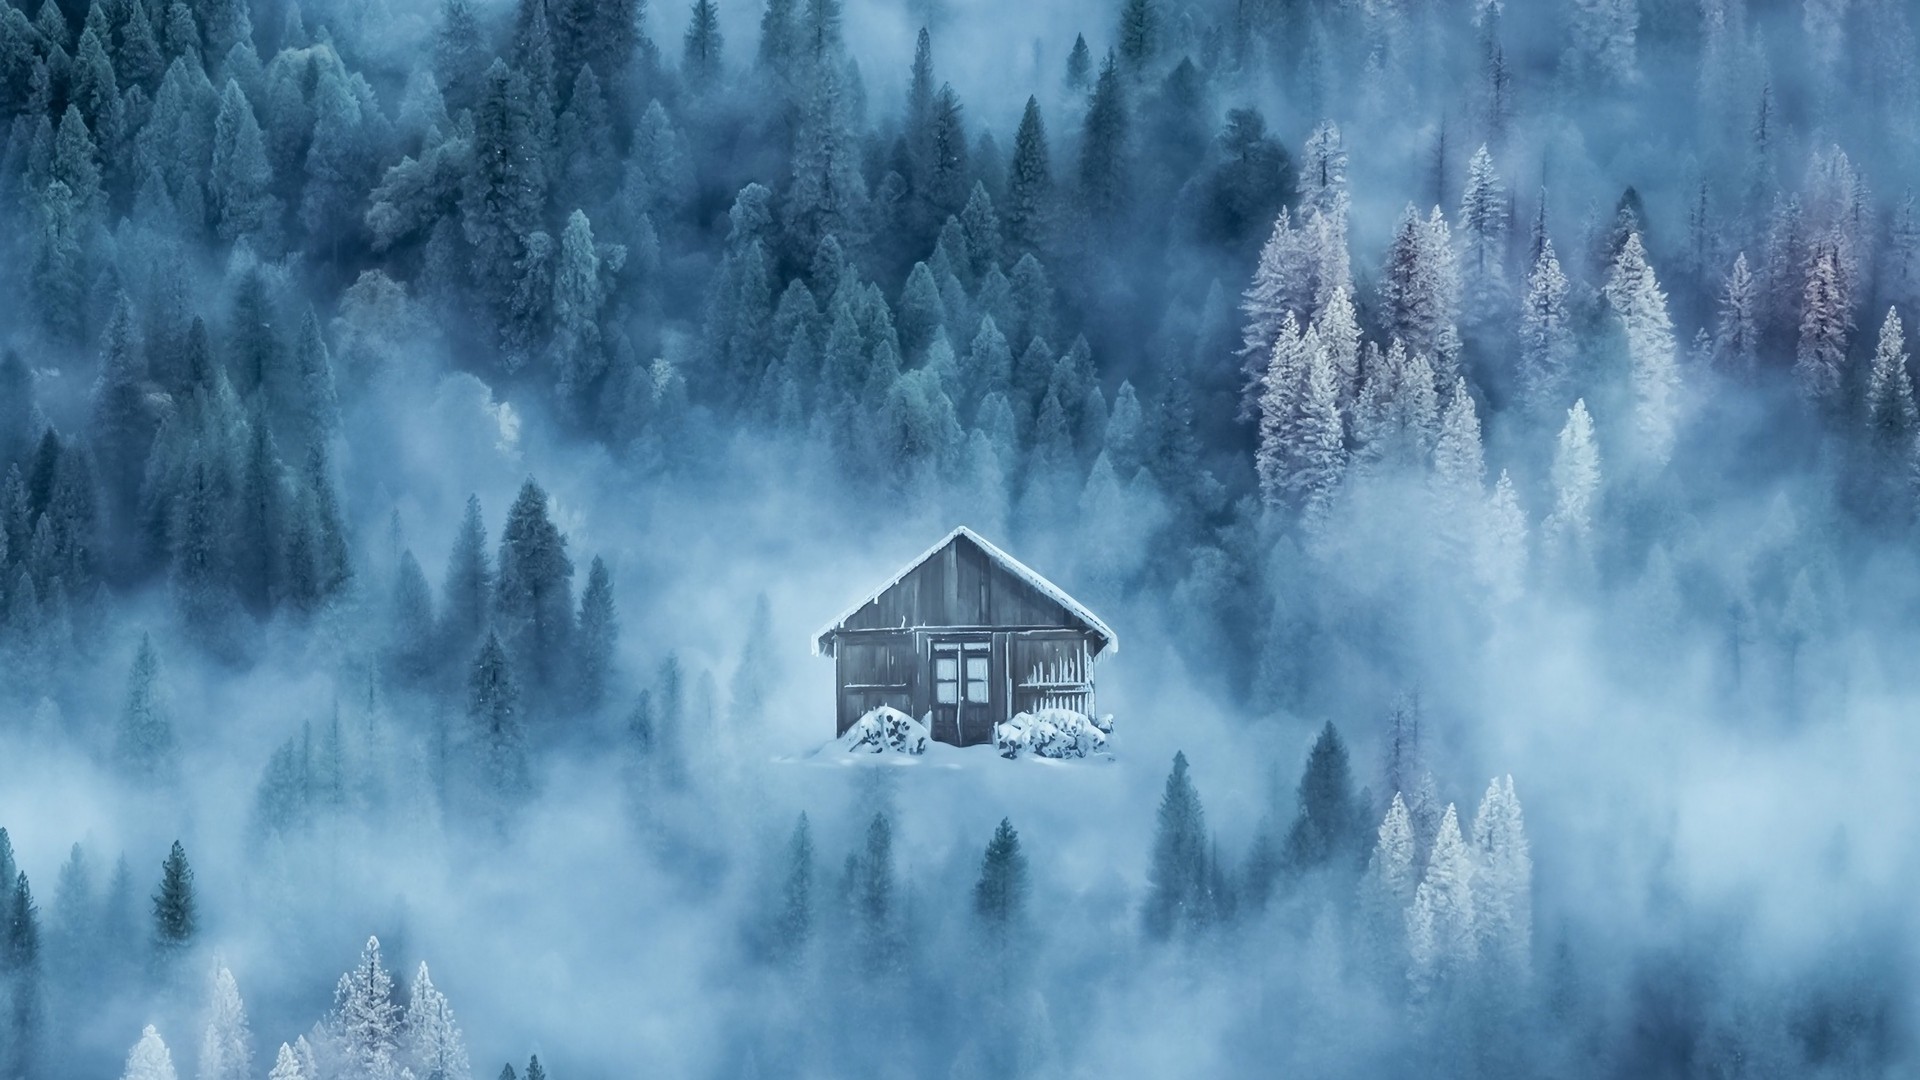 1920x1080 wallpapers: house, fog, snow, winter (image)